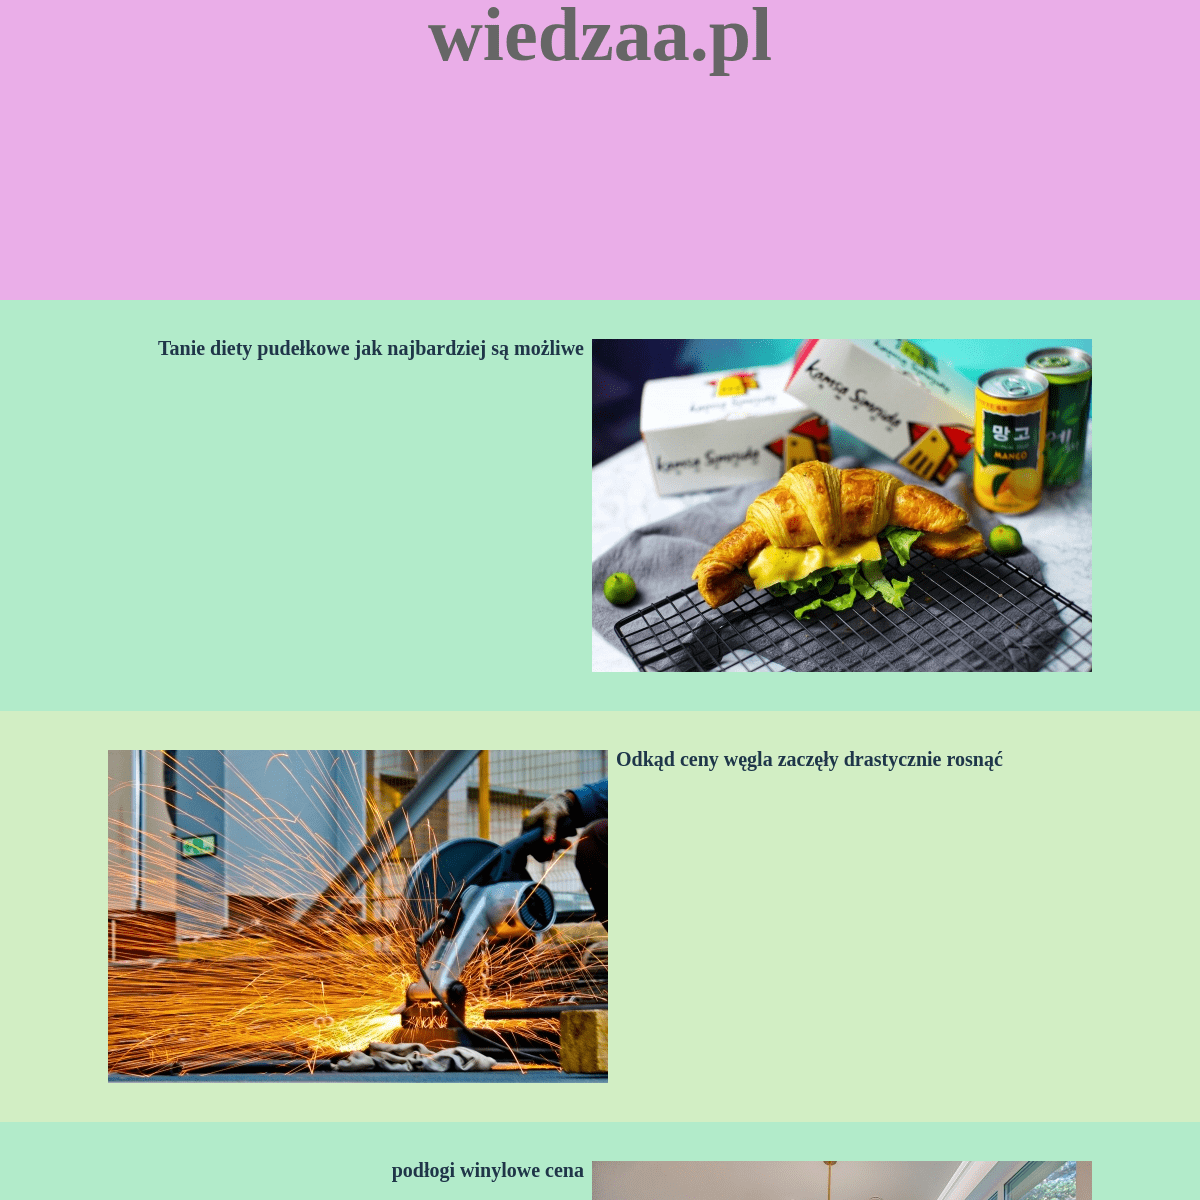 A complete backup of https://wiedzaa.pl